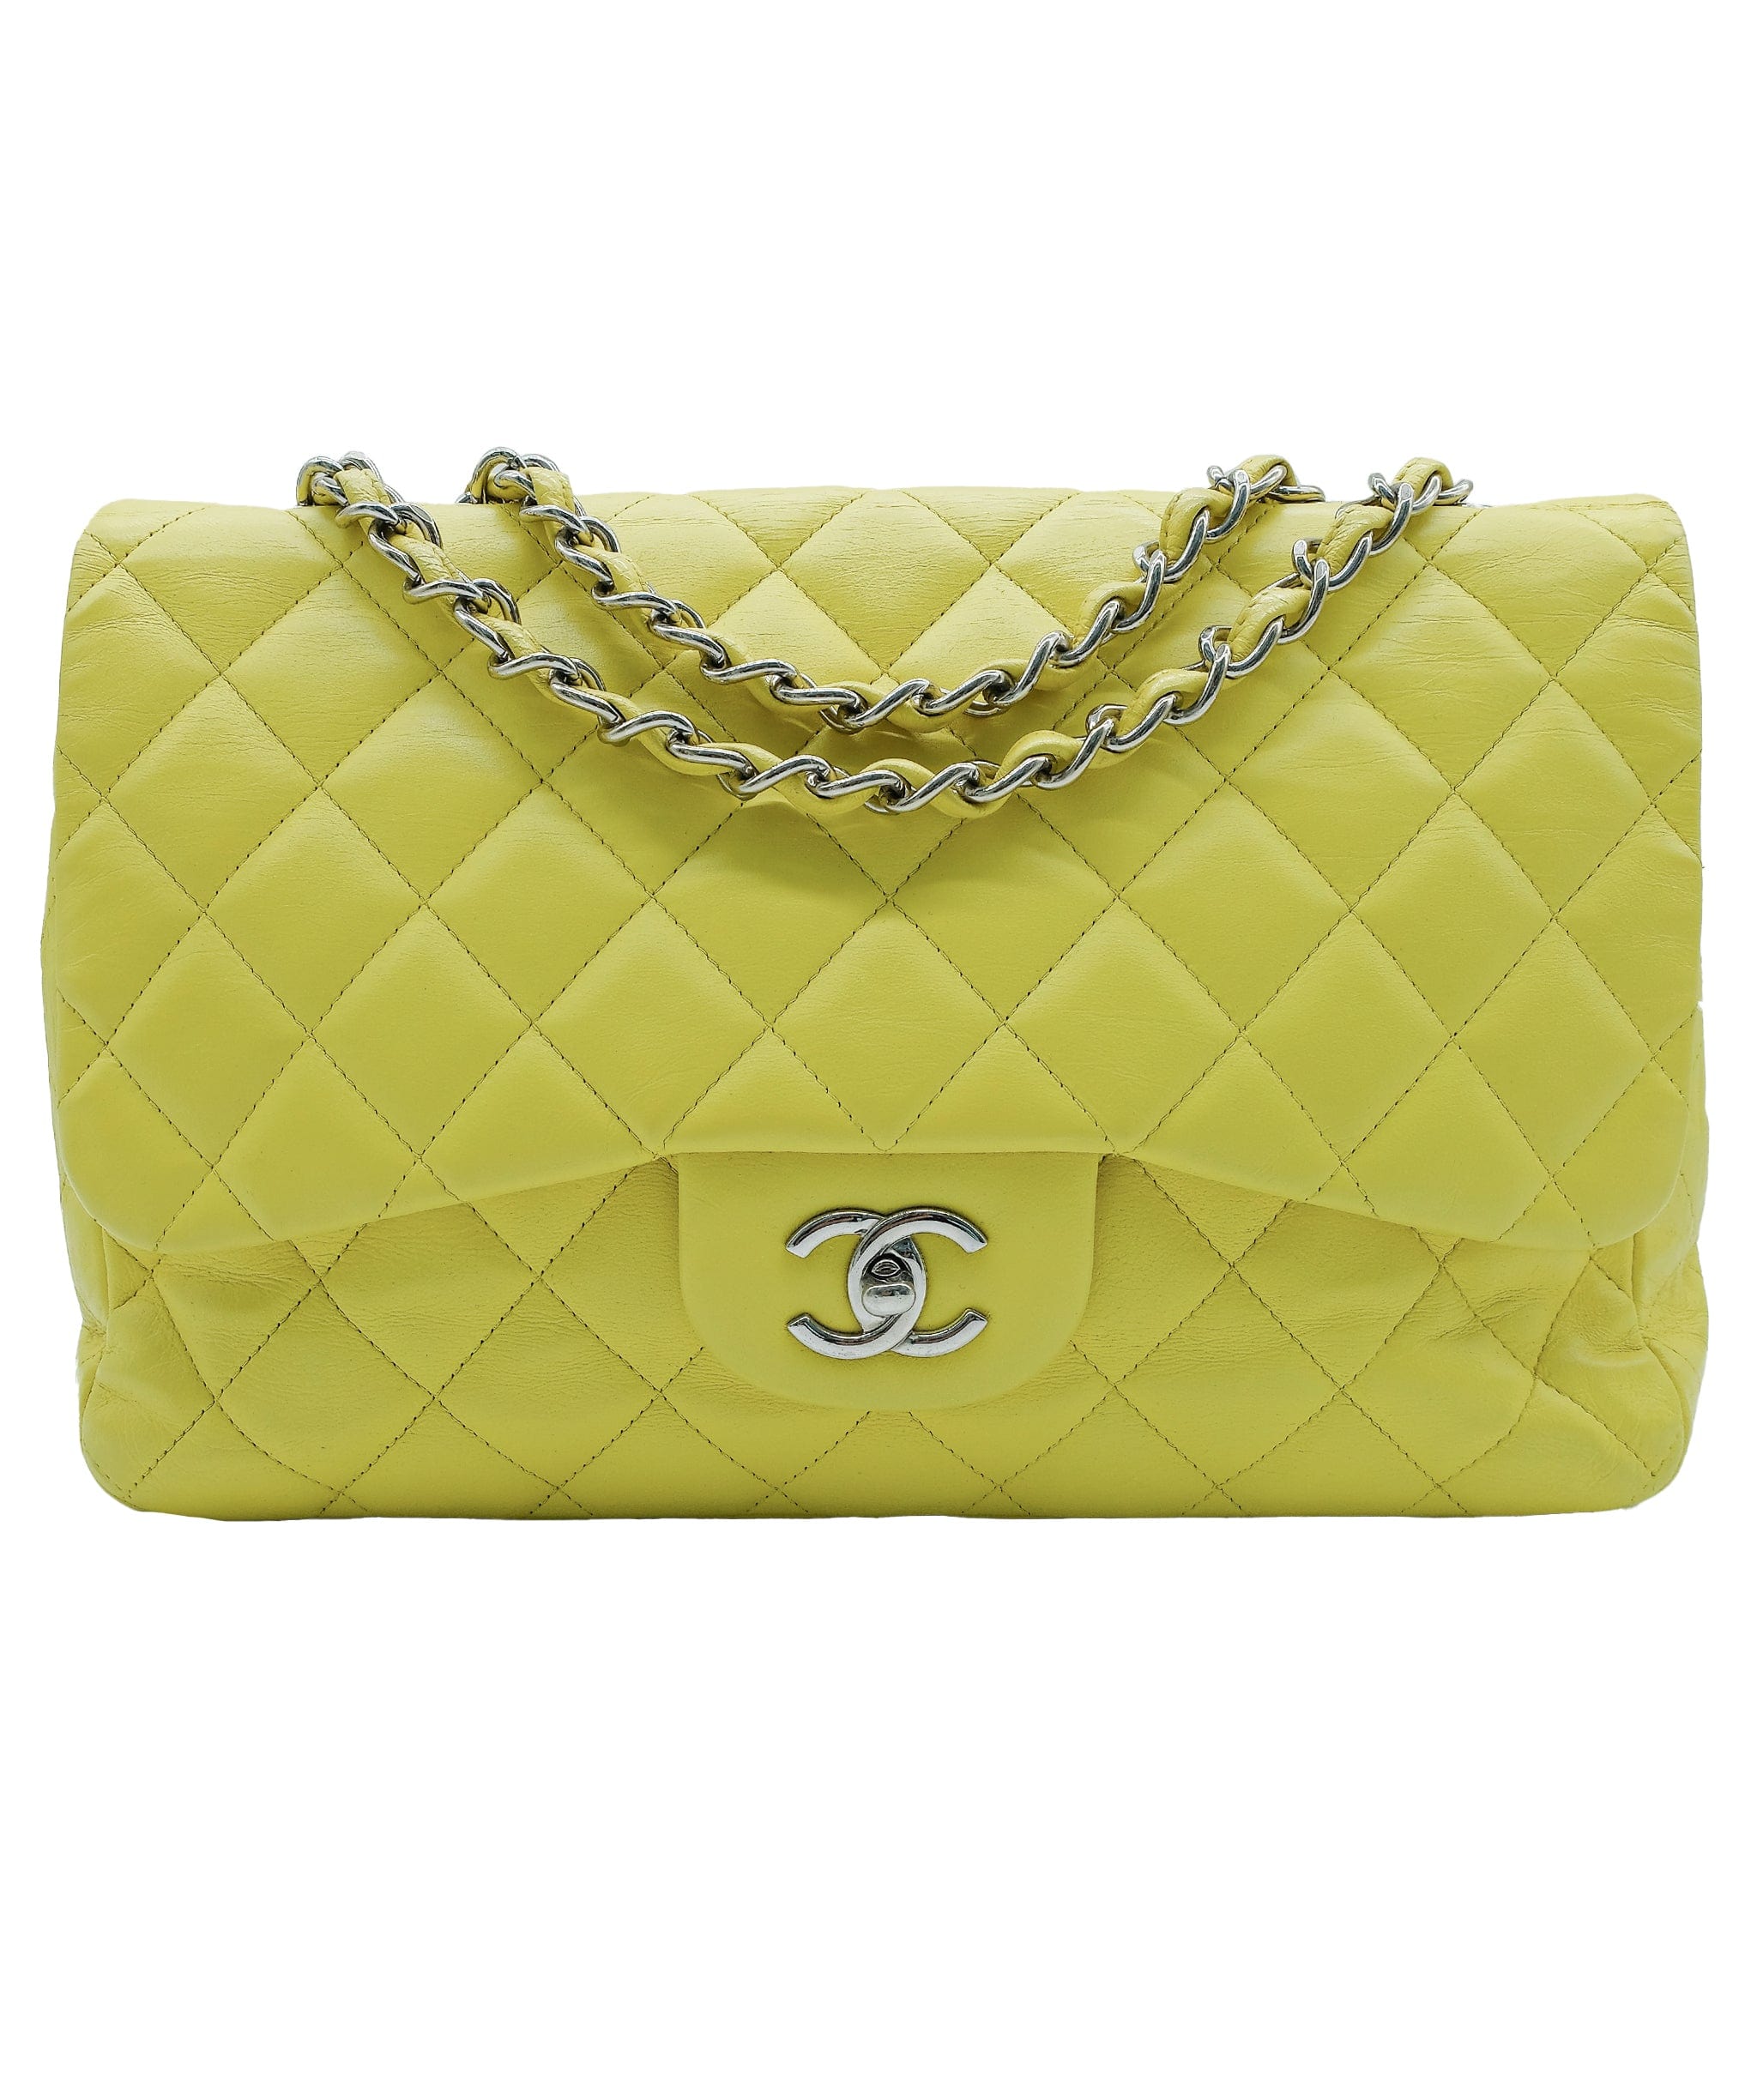 Classic Jumbo Double Flap Bag Quilted Lambskin Flap